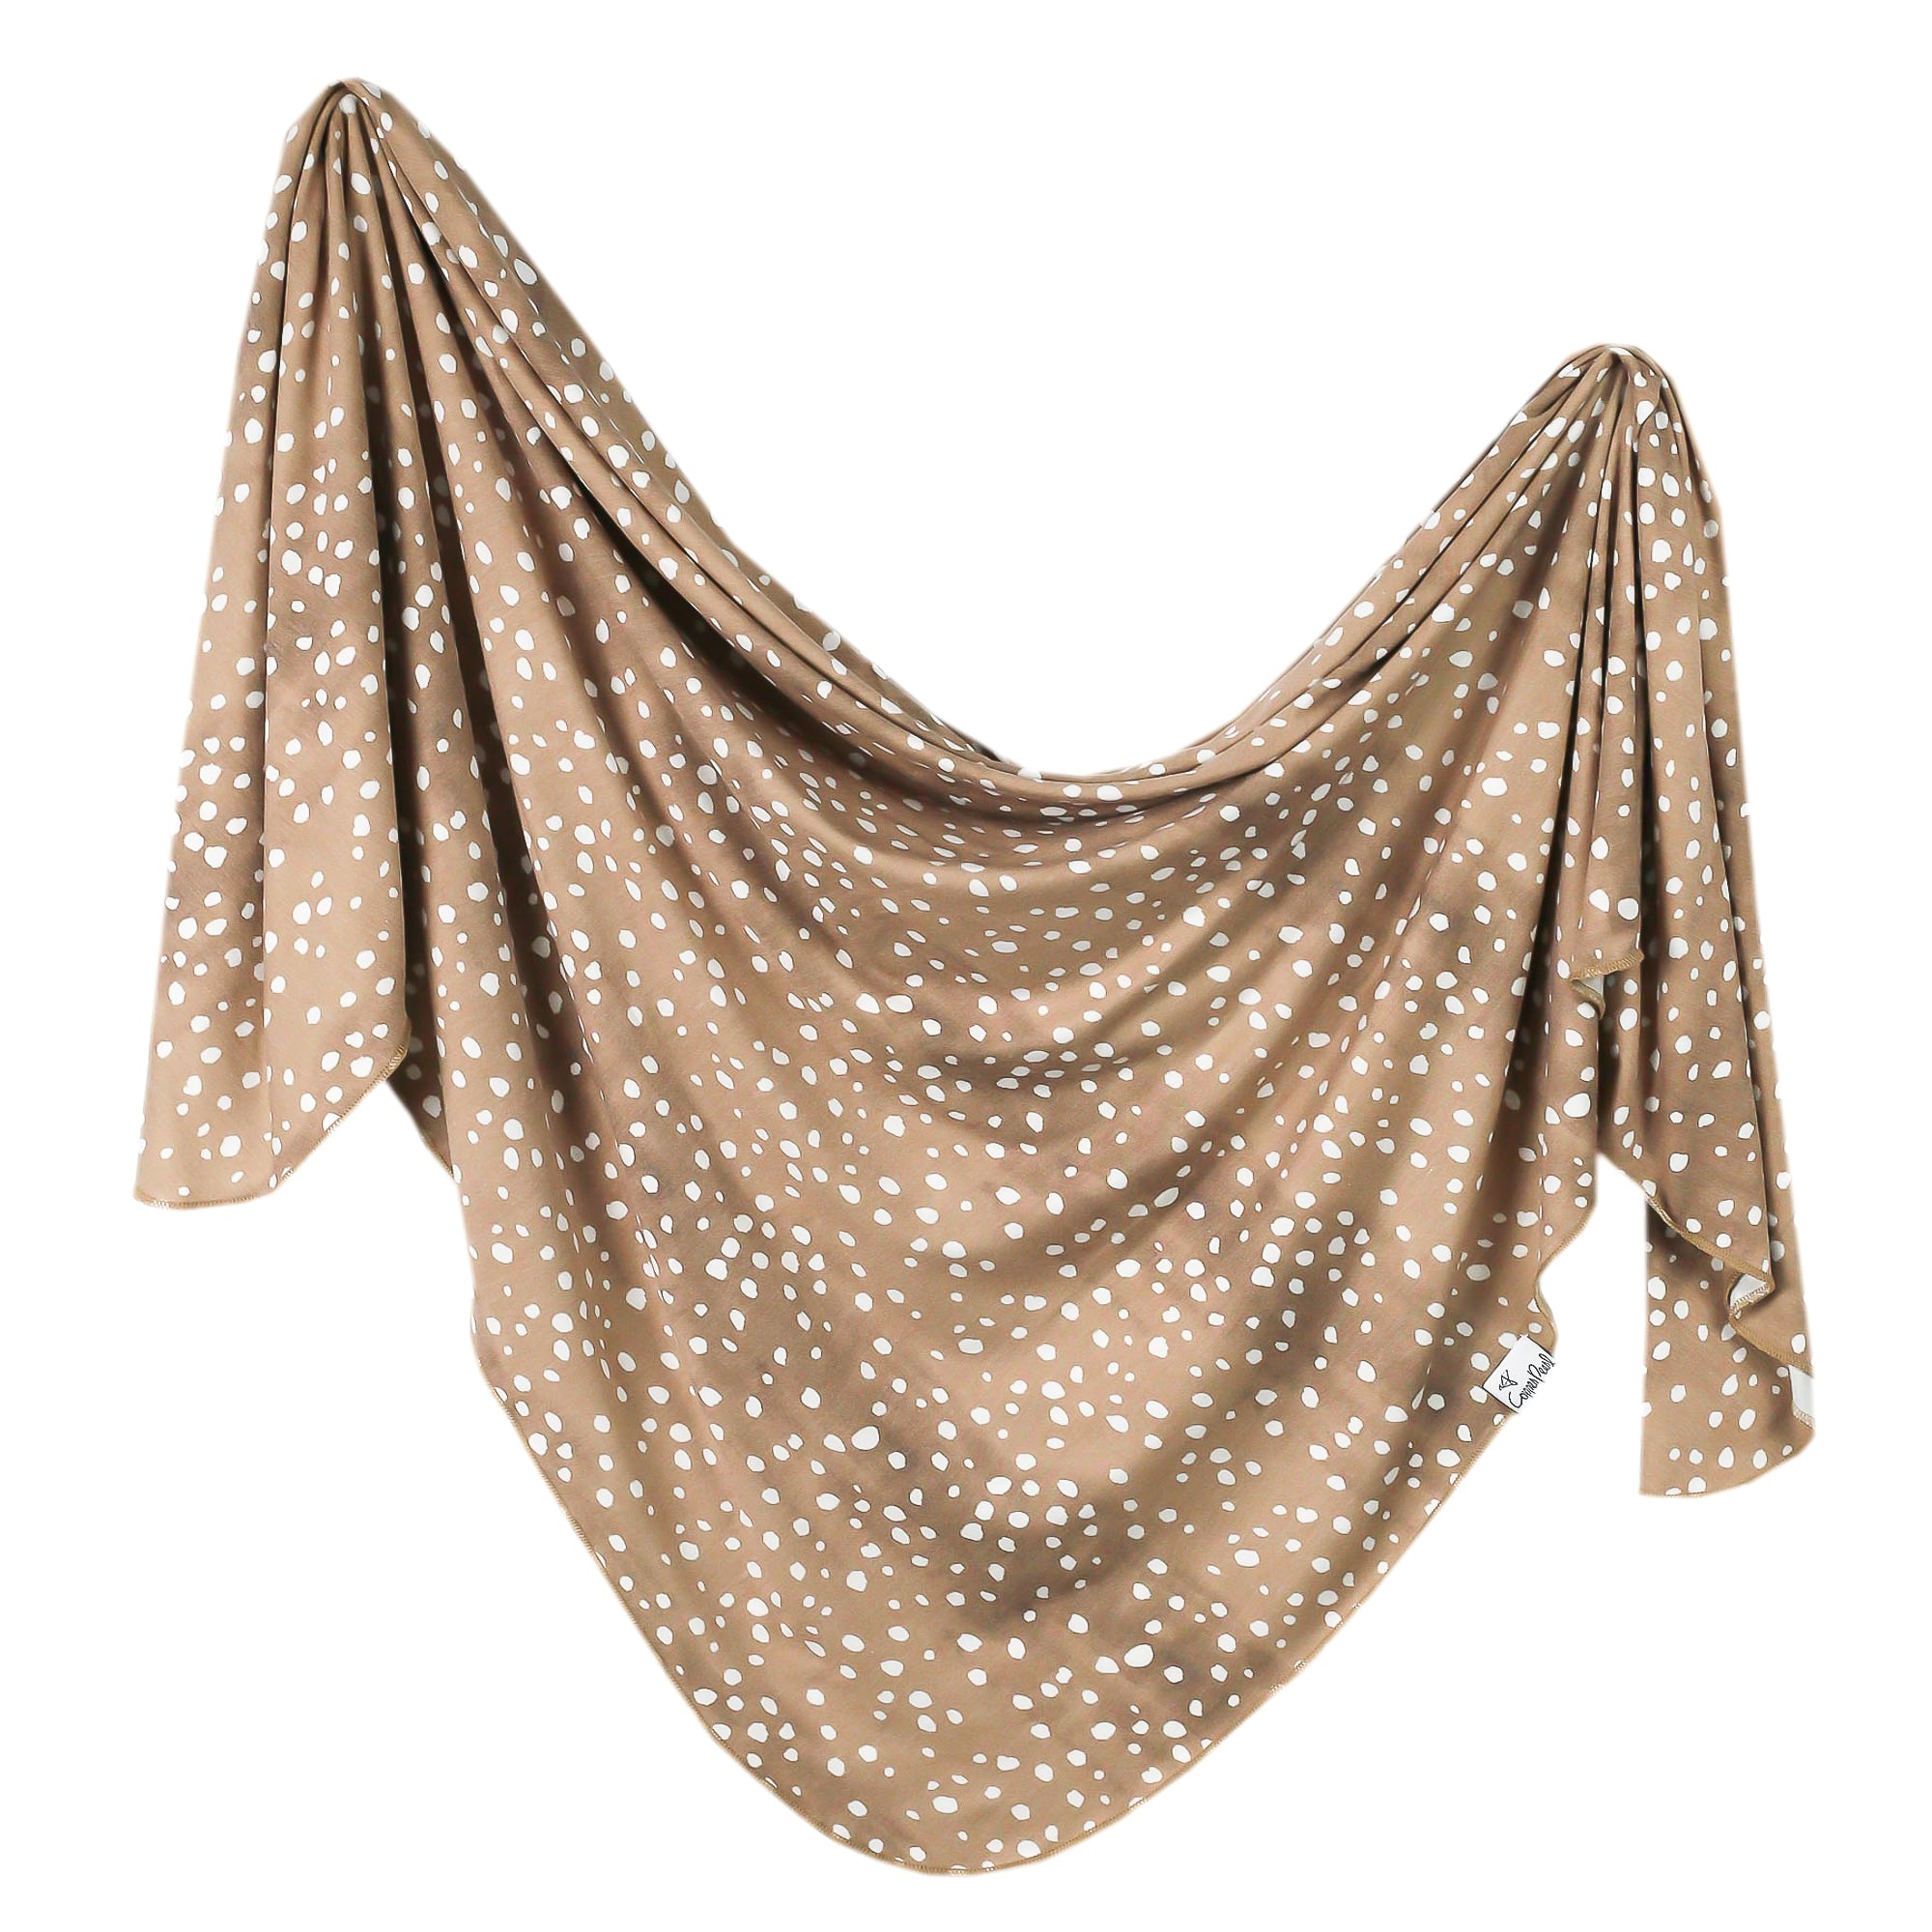 Knit Swaddle Blanket - Fawn